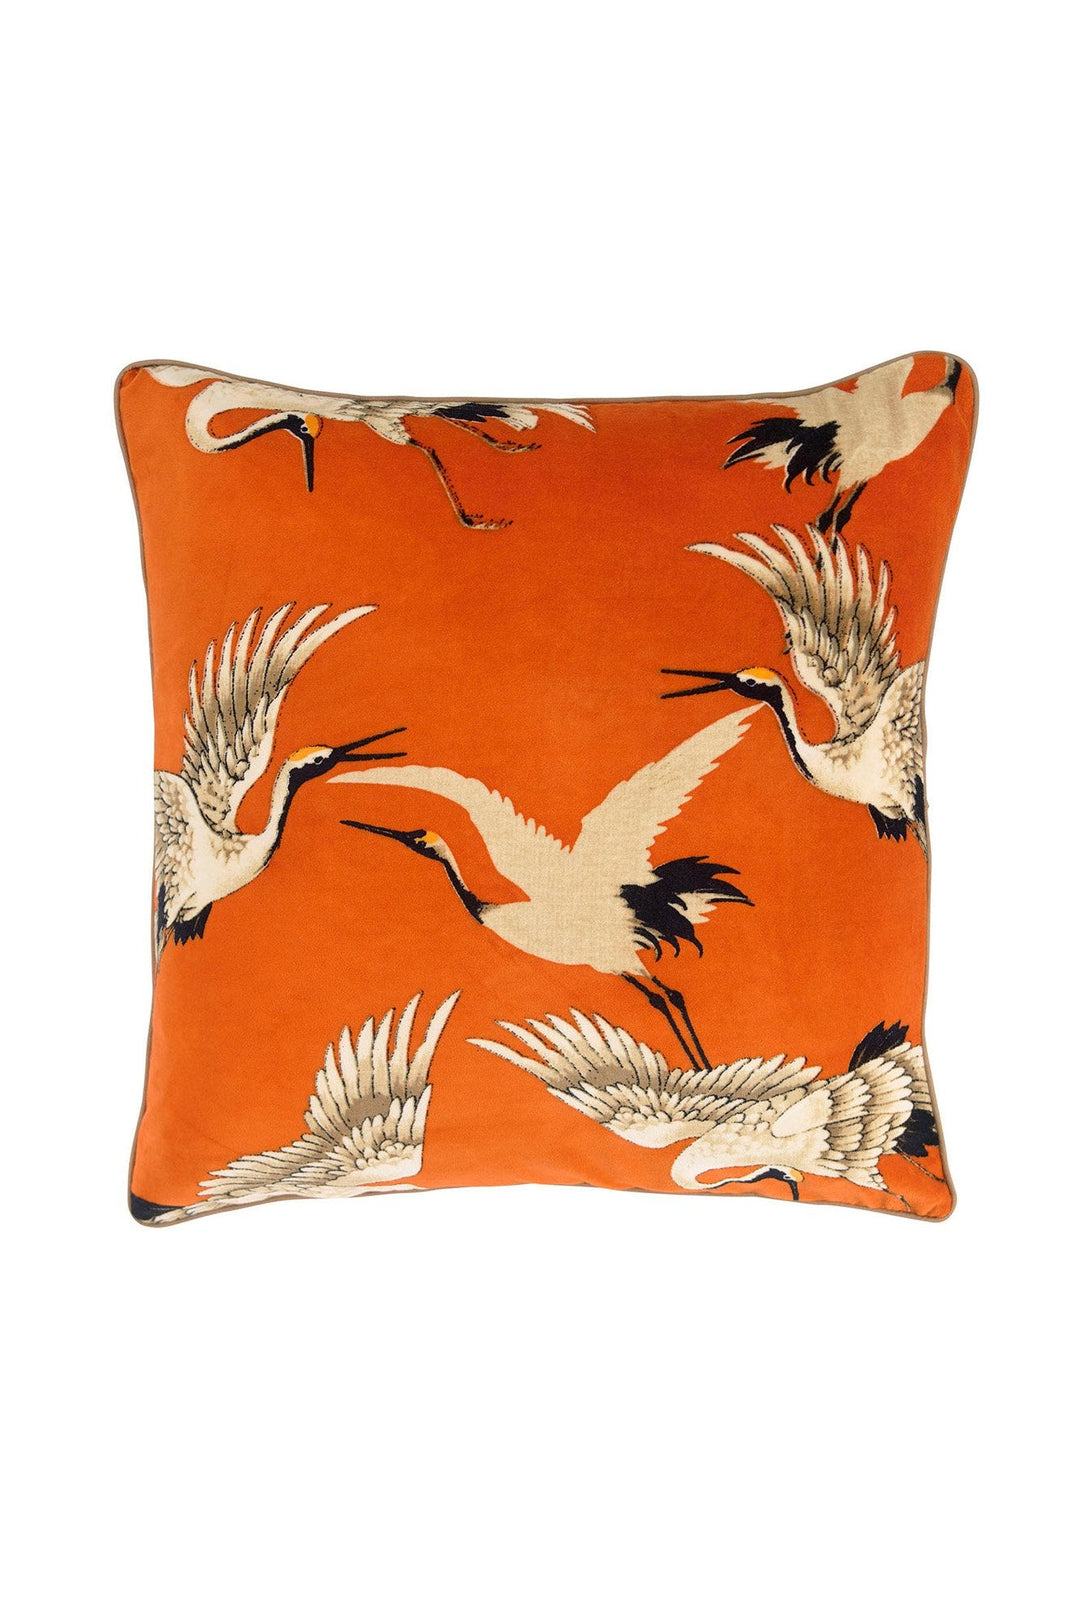 One Hundred Stars Stork Orange Square Velvet Cushion- These limited edition velvet cushions are 50 x 50cm and can purchased with or without an ethically sourced duck feather inner.